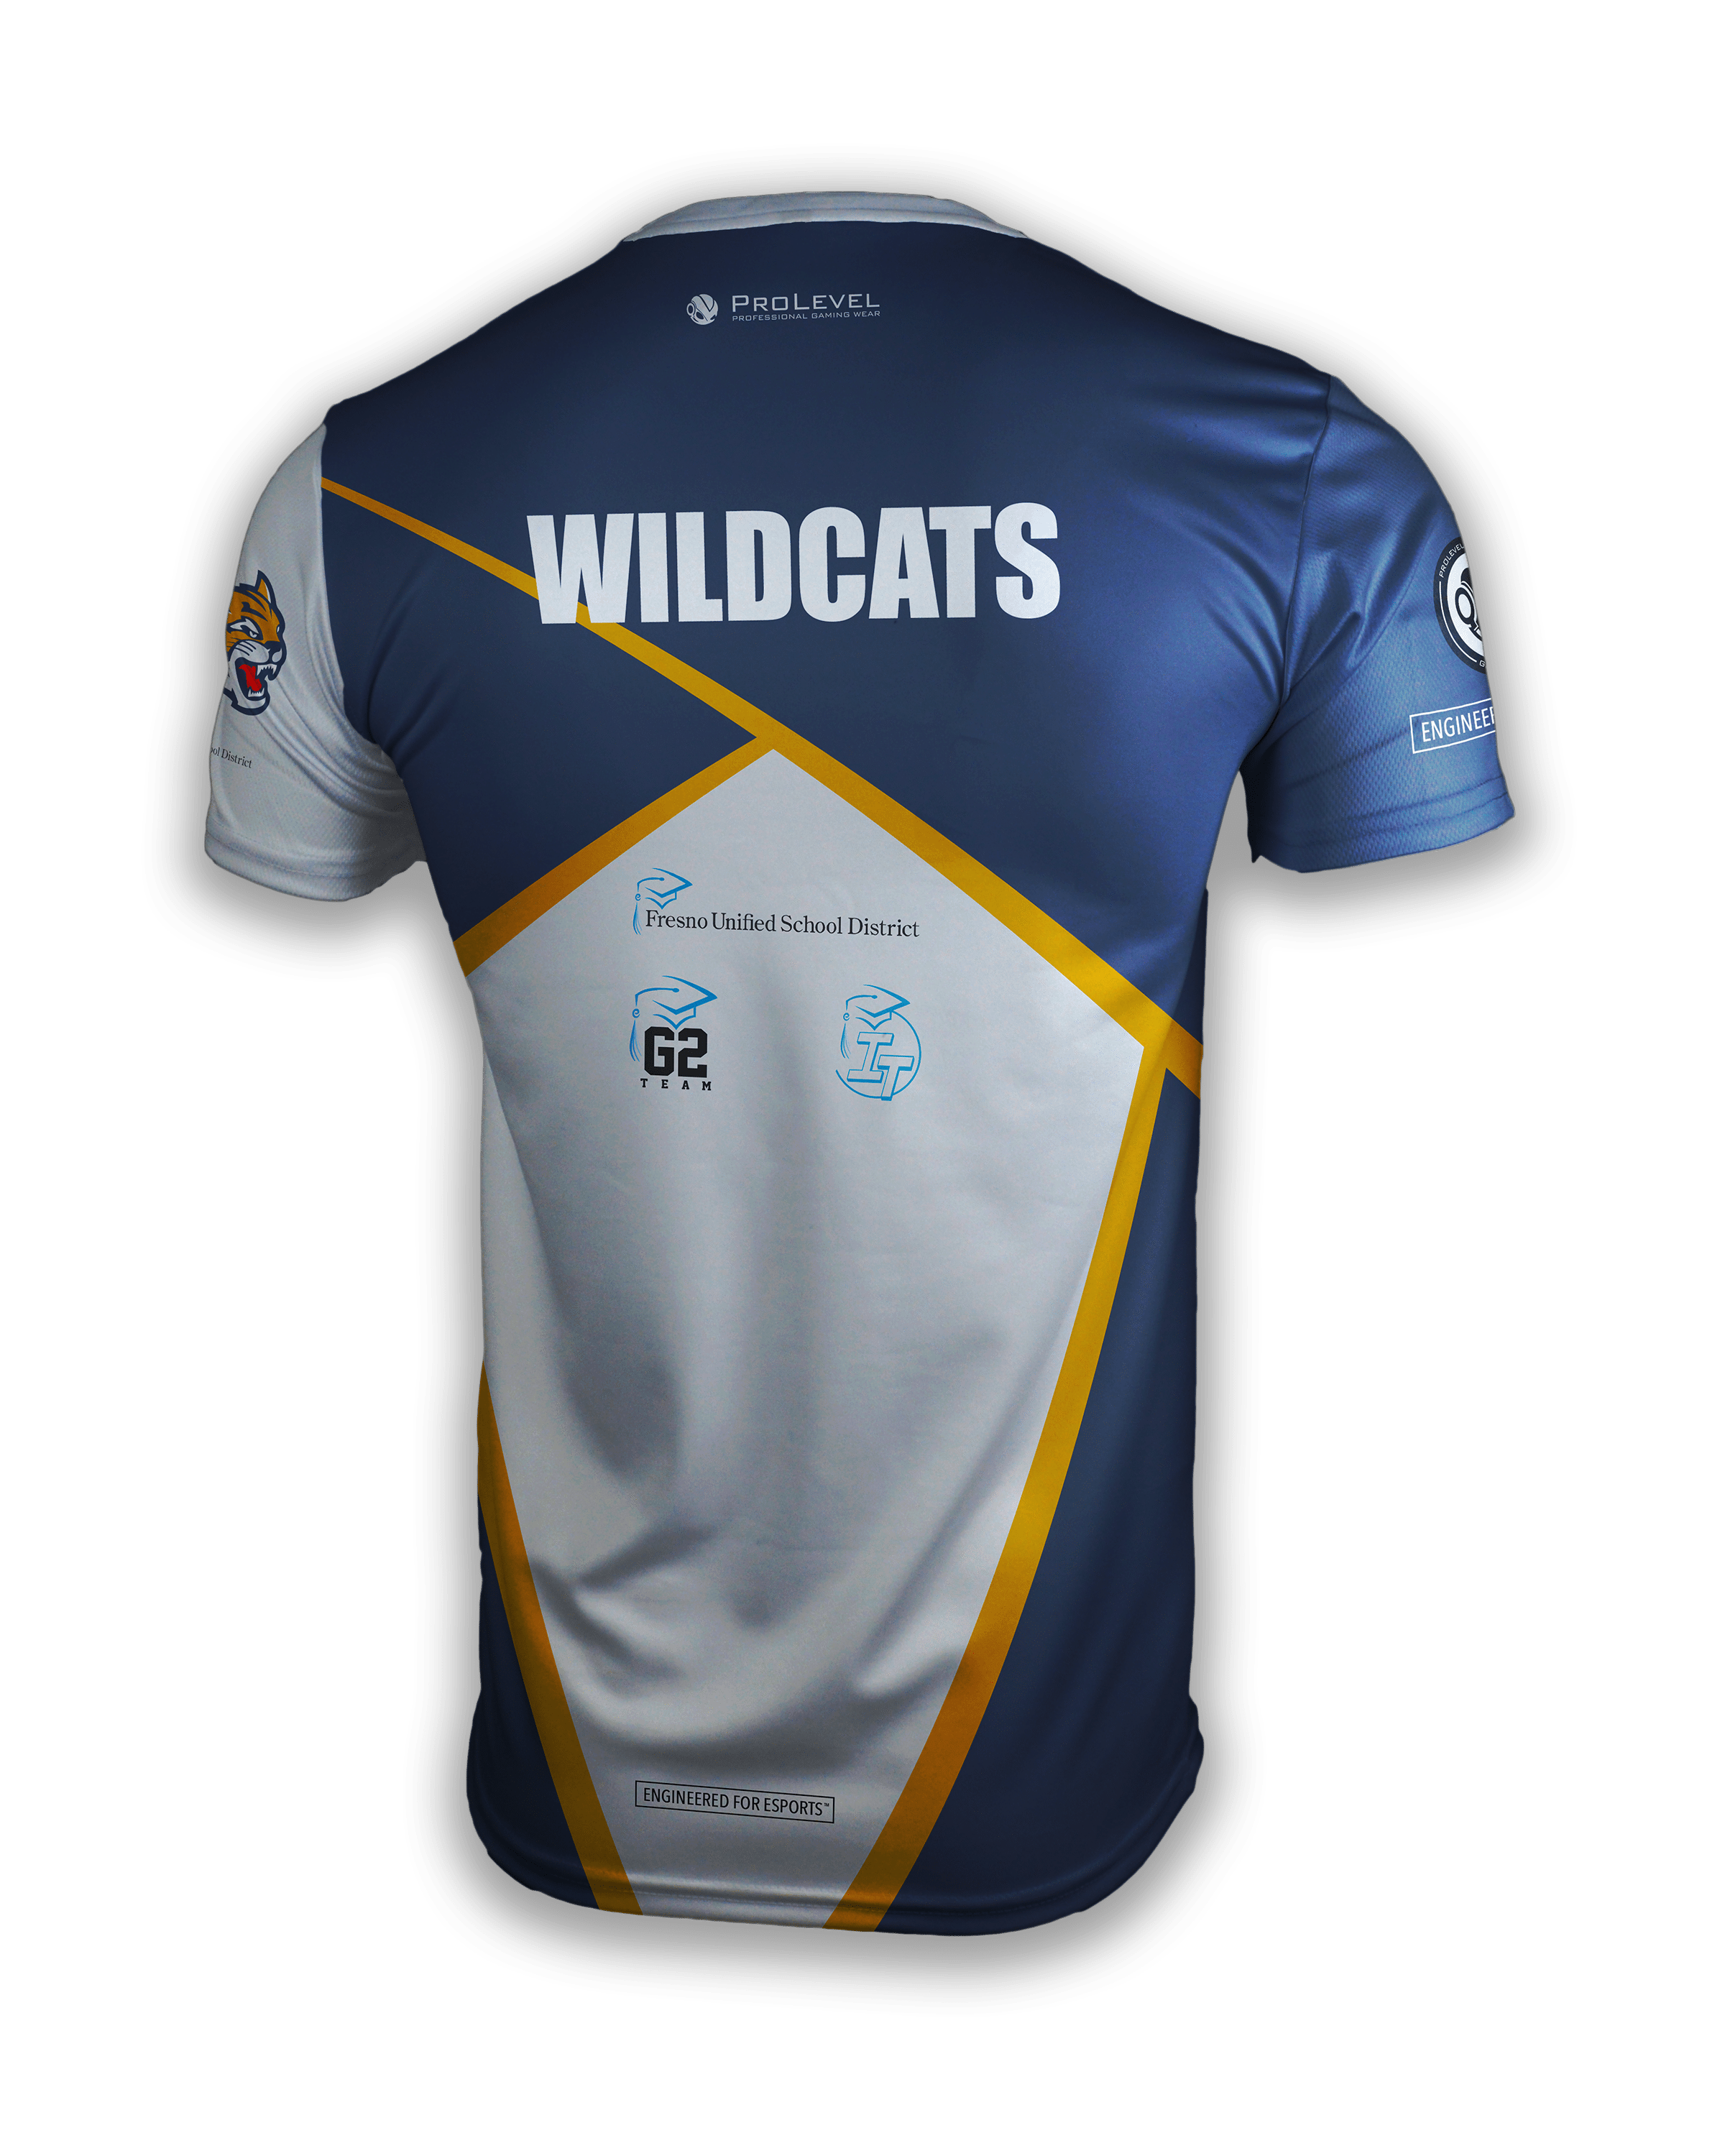 League of Legends Jerseys That Will Make You Feel Pro